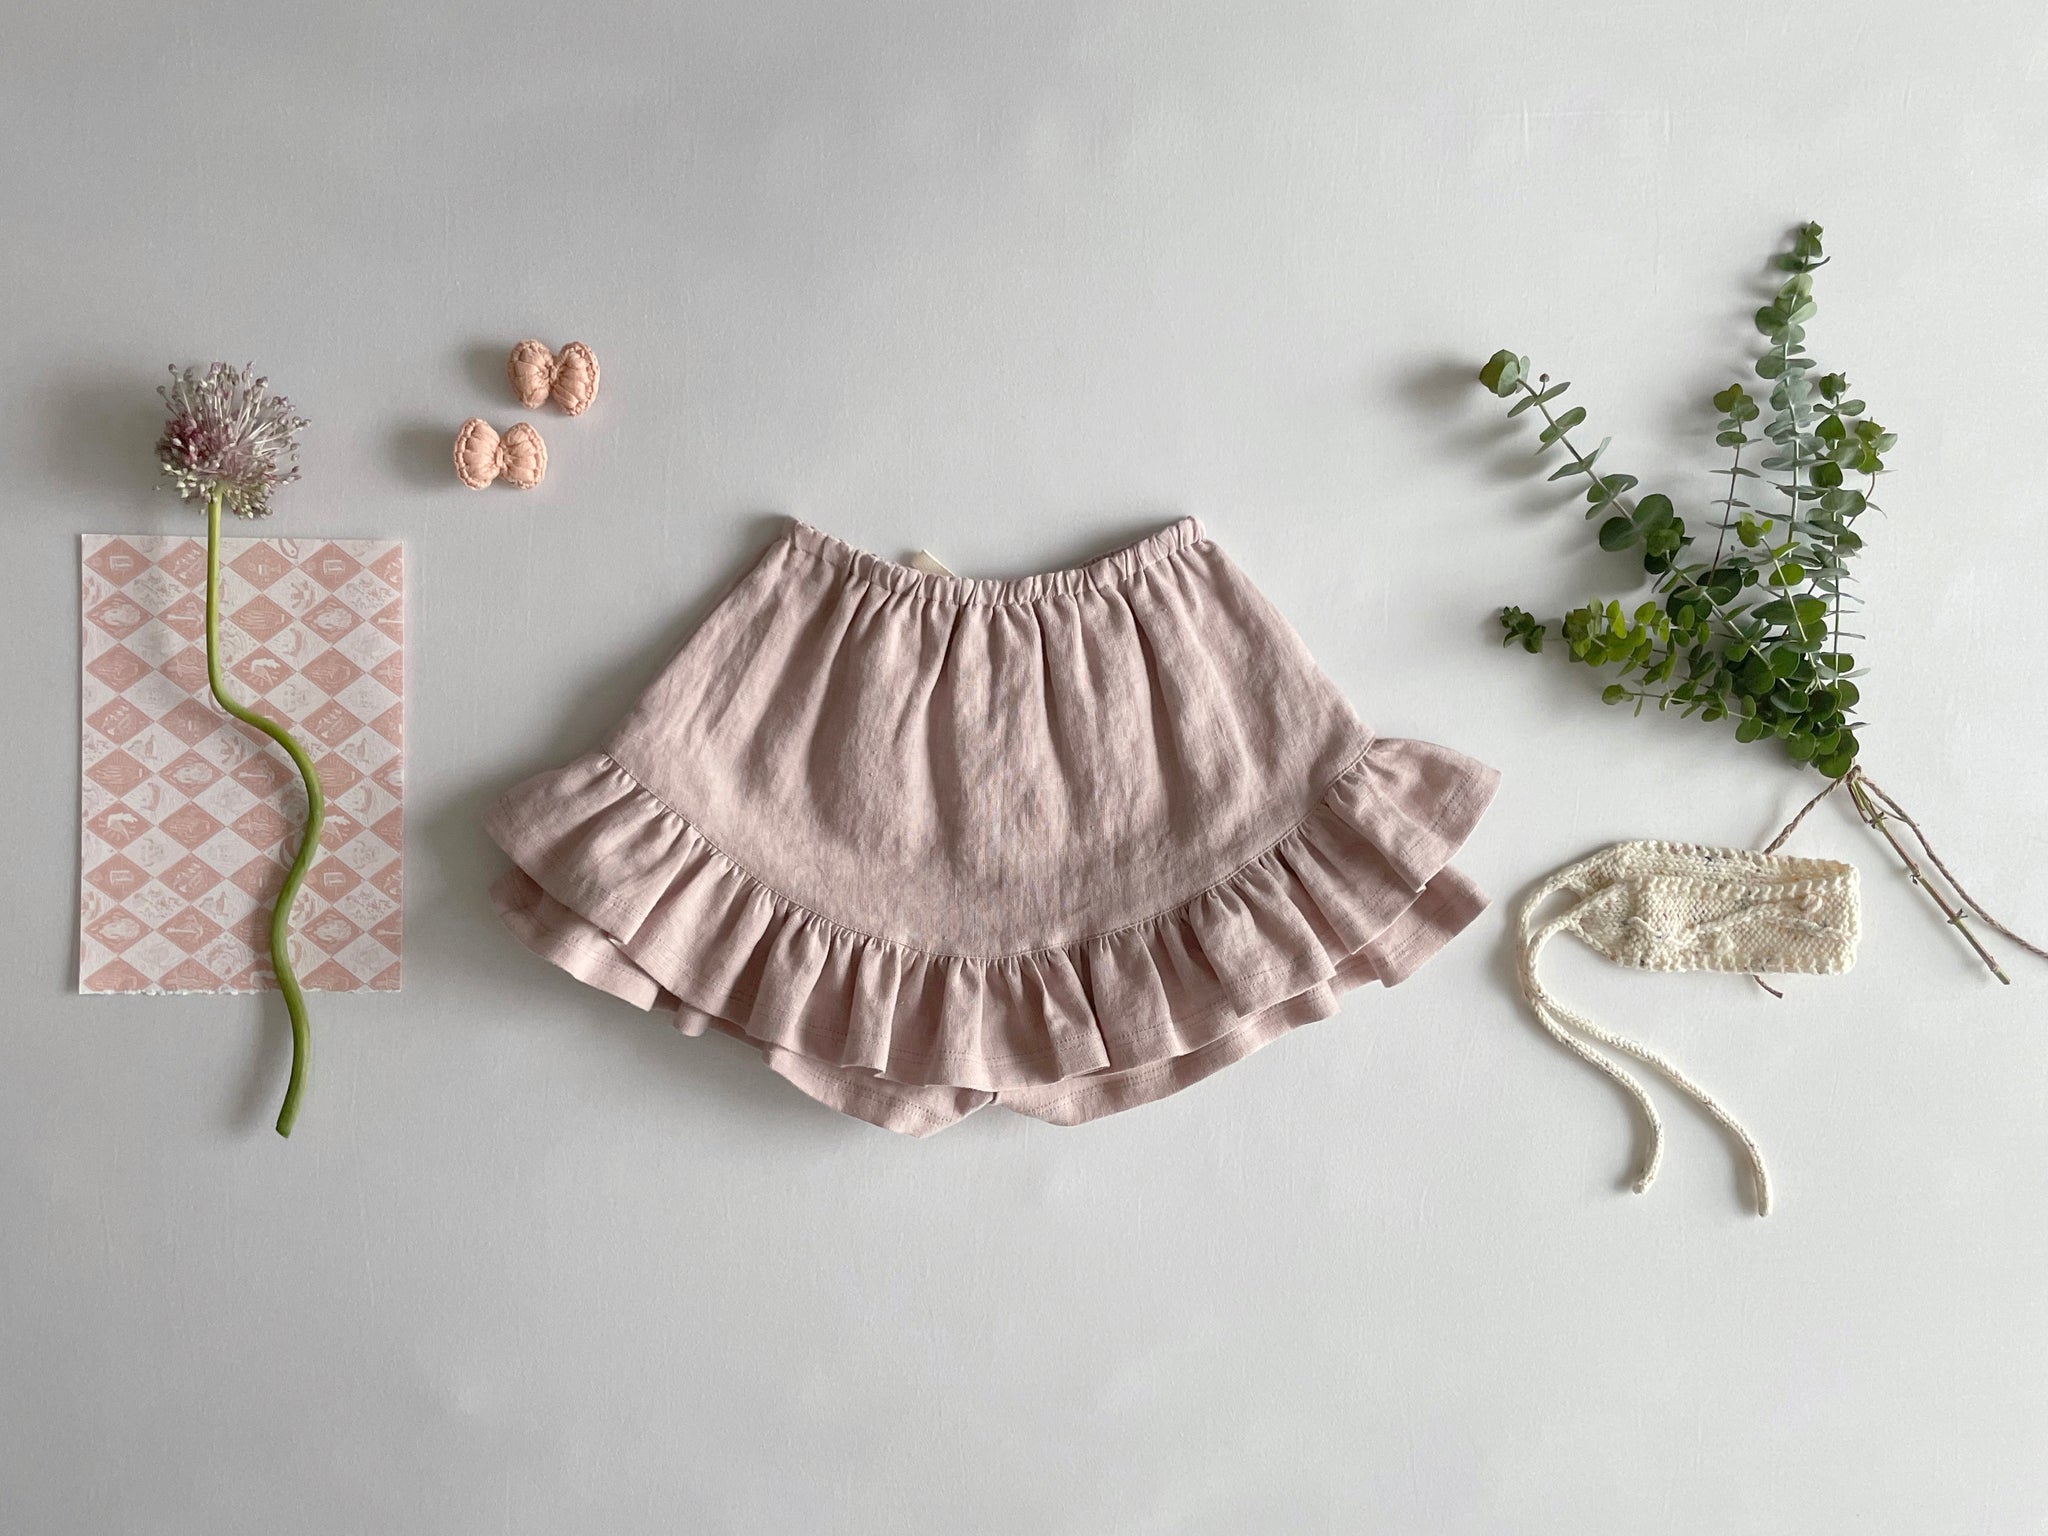 Culotte Skirt - Pale Pink